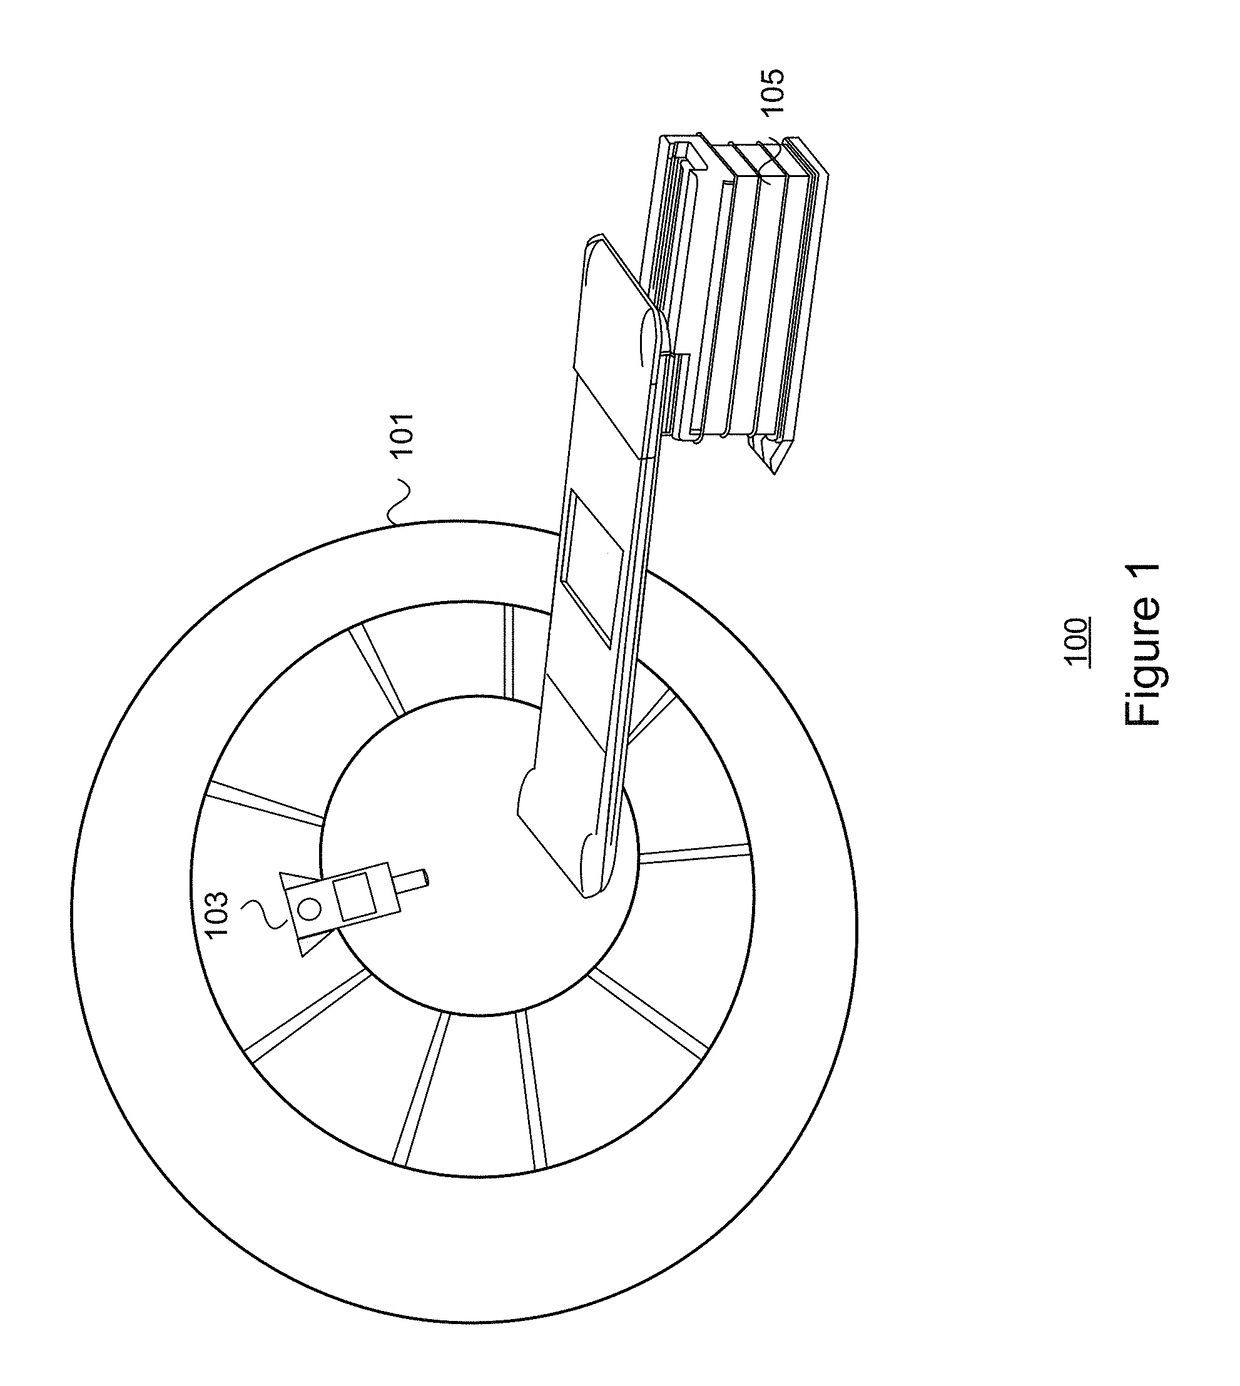 Beam limiting device for intensity modulated proton therapy